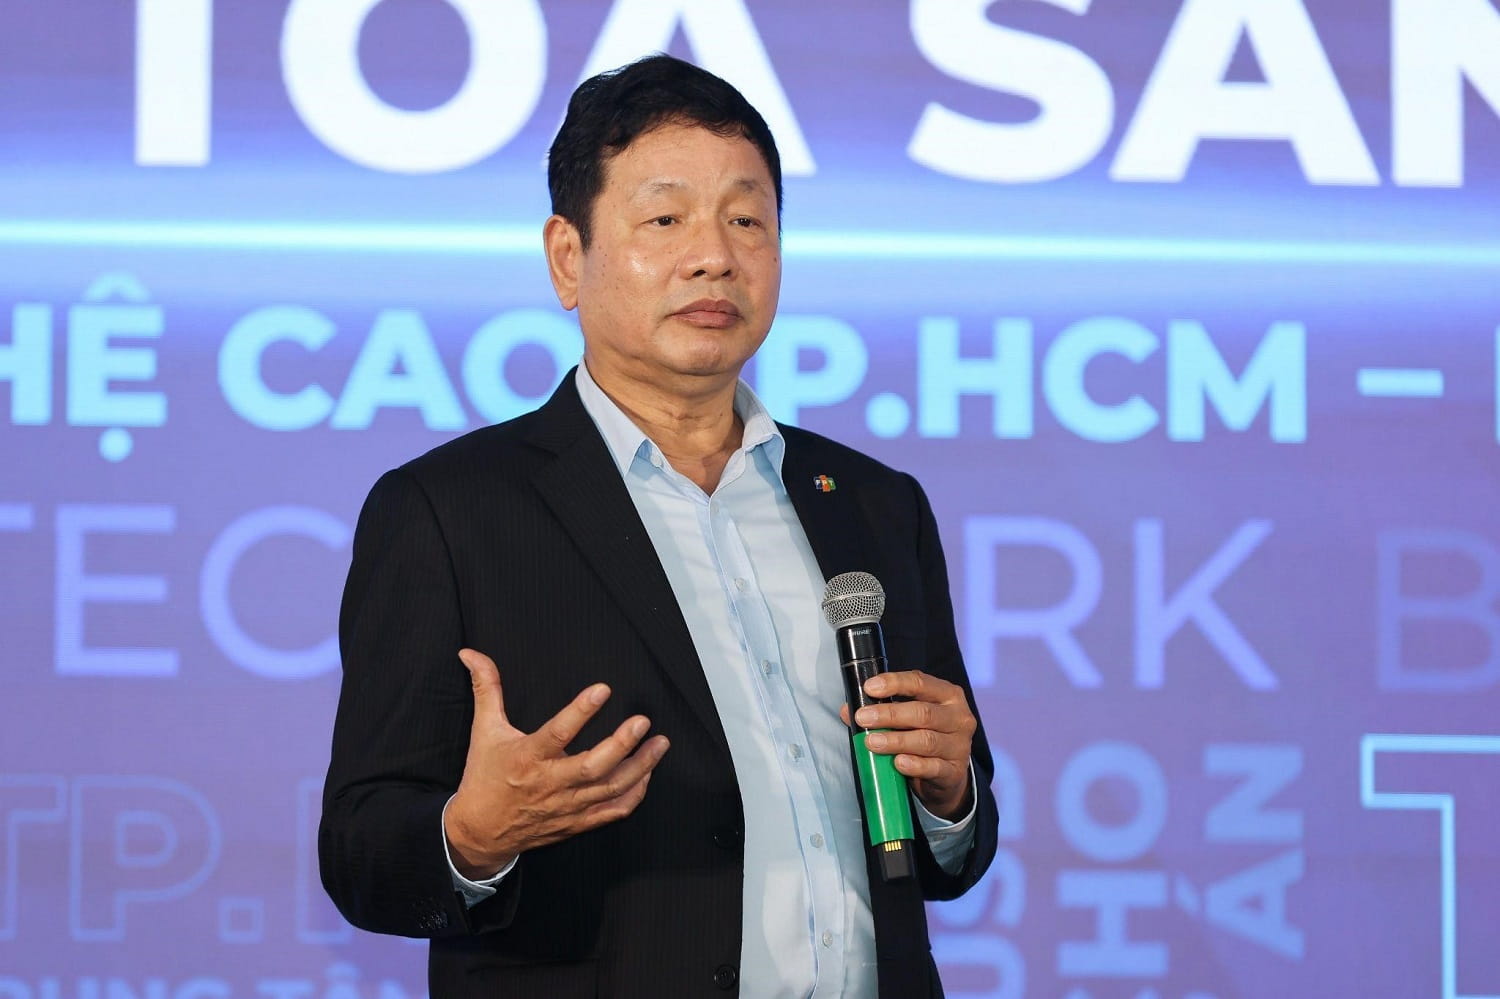 Mr. Truong Gia Binh, Chairman of FPT, shared at the 20th Anniversary of HCMC Hi-Tech Park